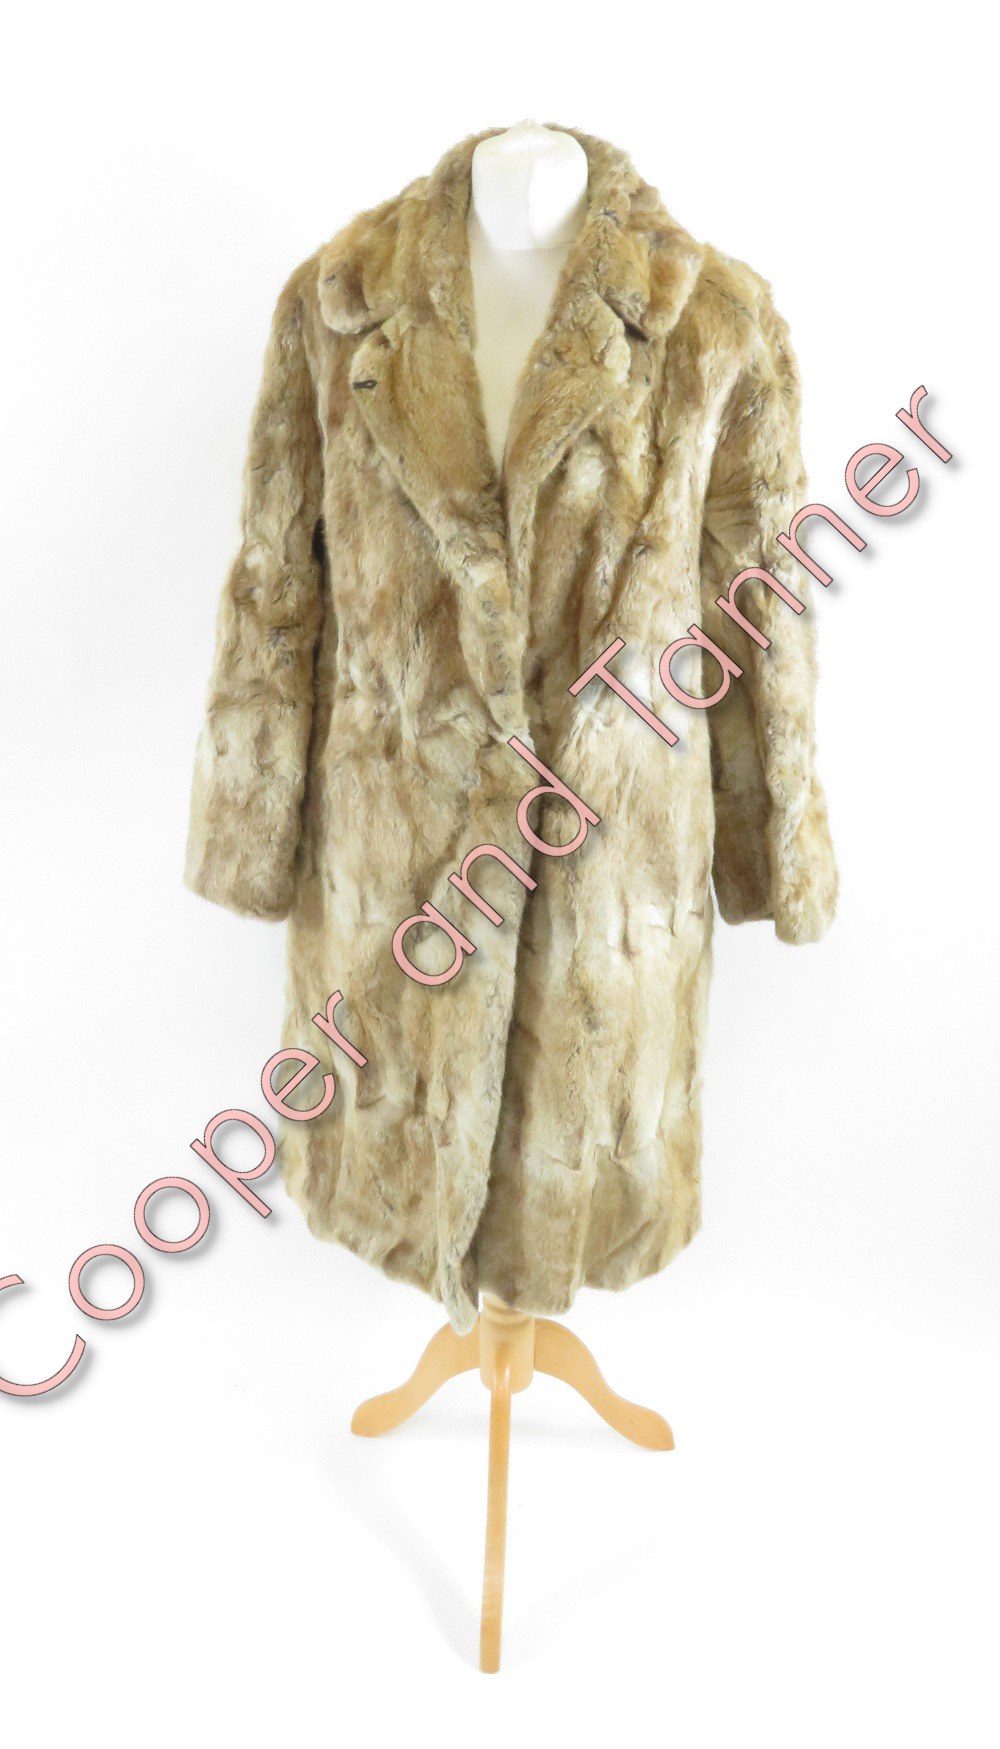 A vintage fur coat by the National Fur Company, along with faux fur coat